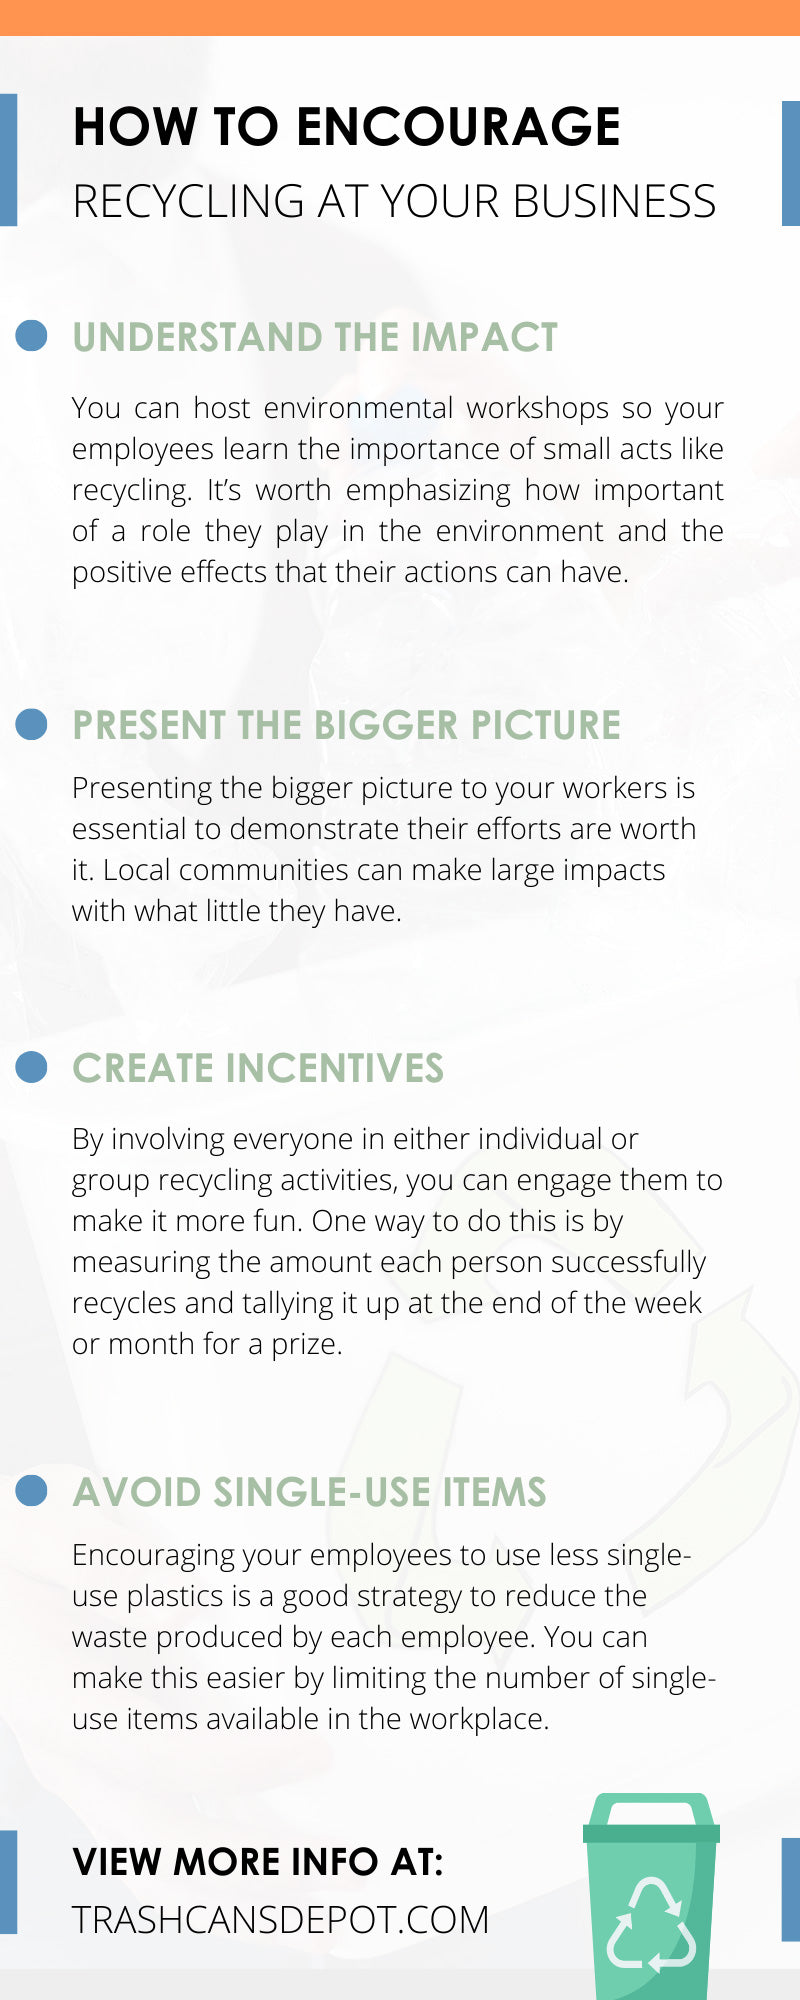 How To Encourage Recycling at Your Business